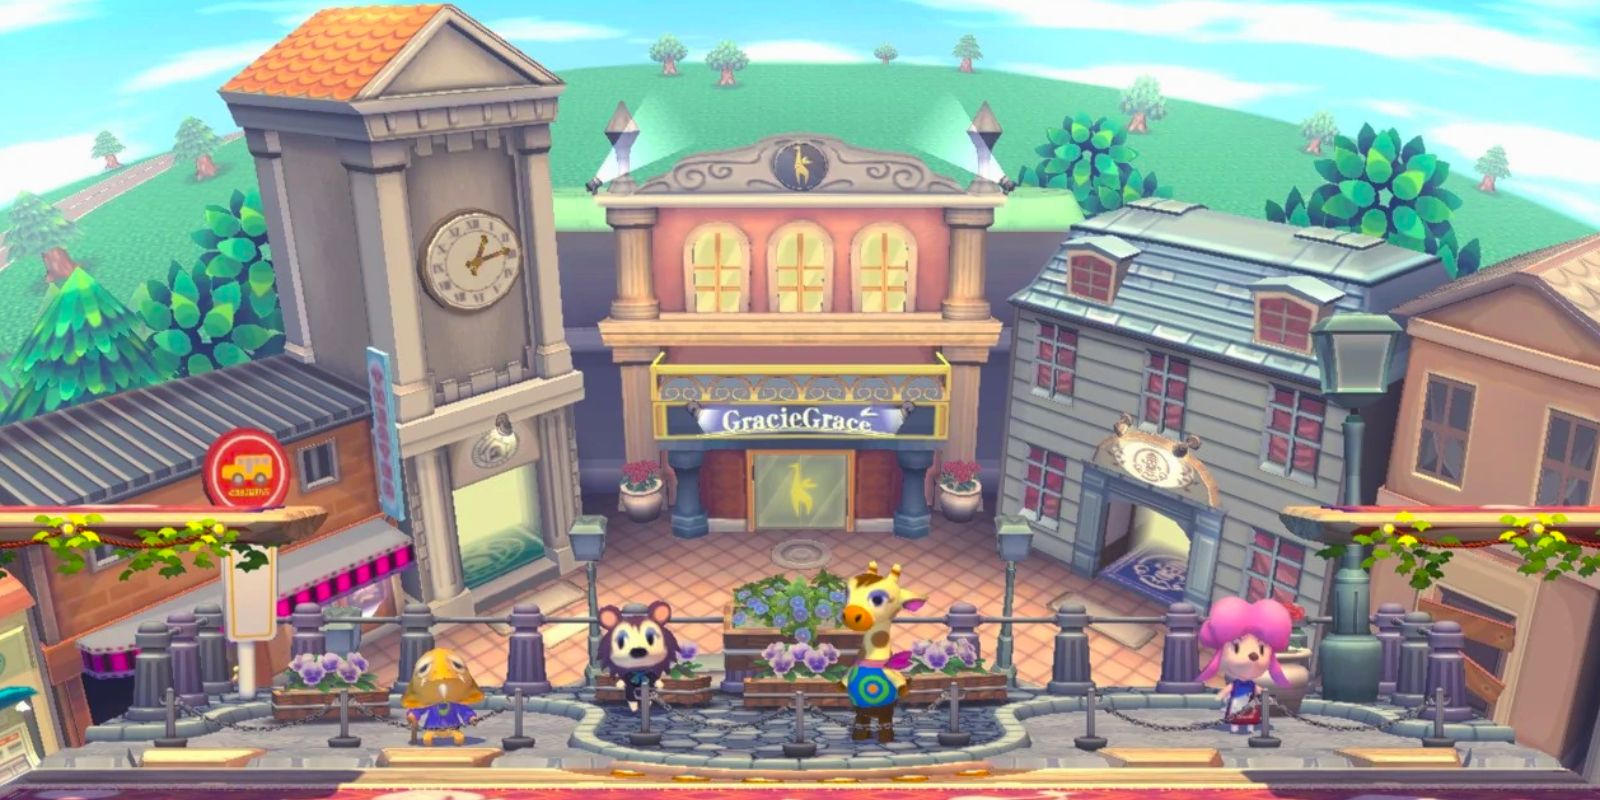 The Next Animal Crossing Game Should Return To The City